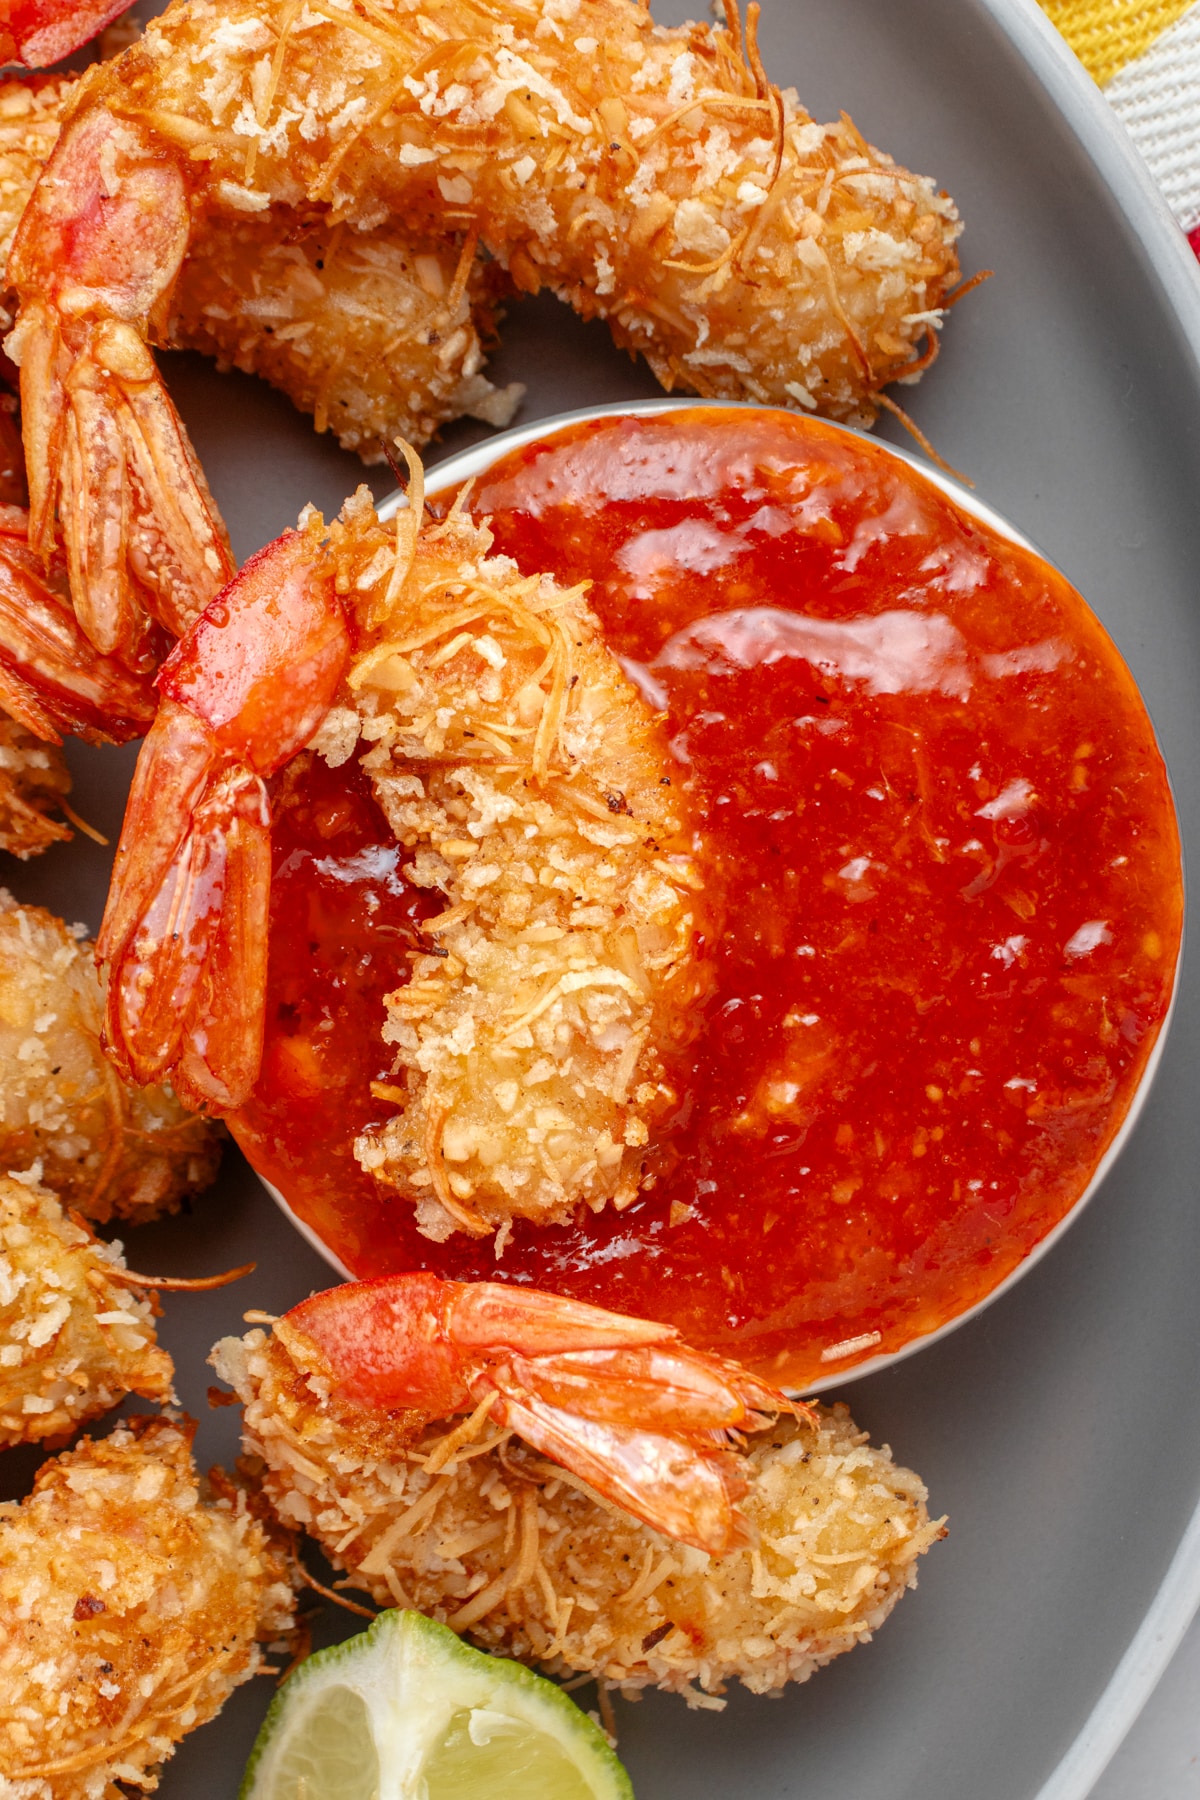 Coconut shrimp and luscious dipping sauce.